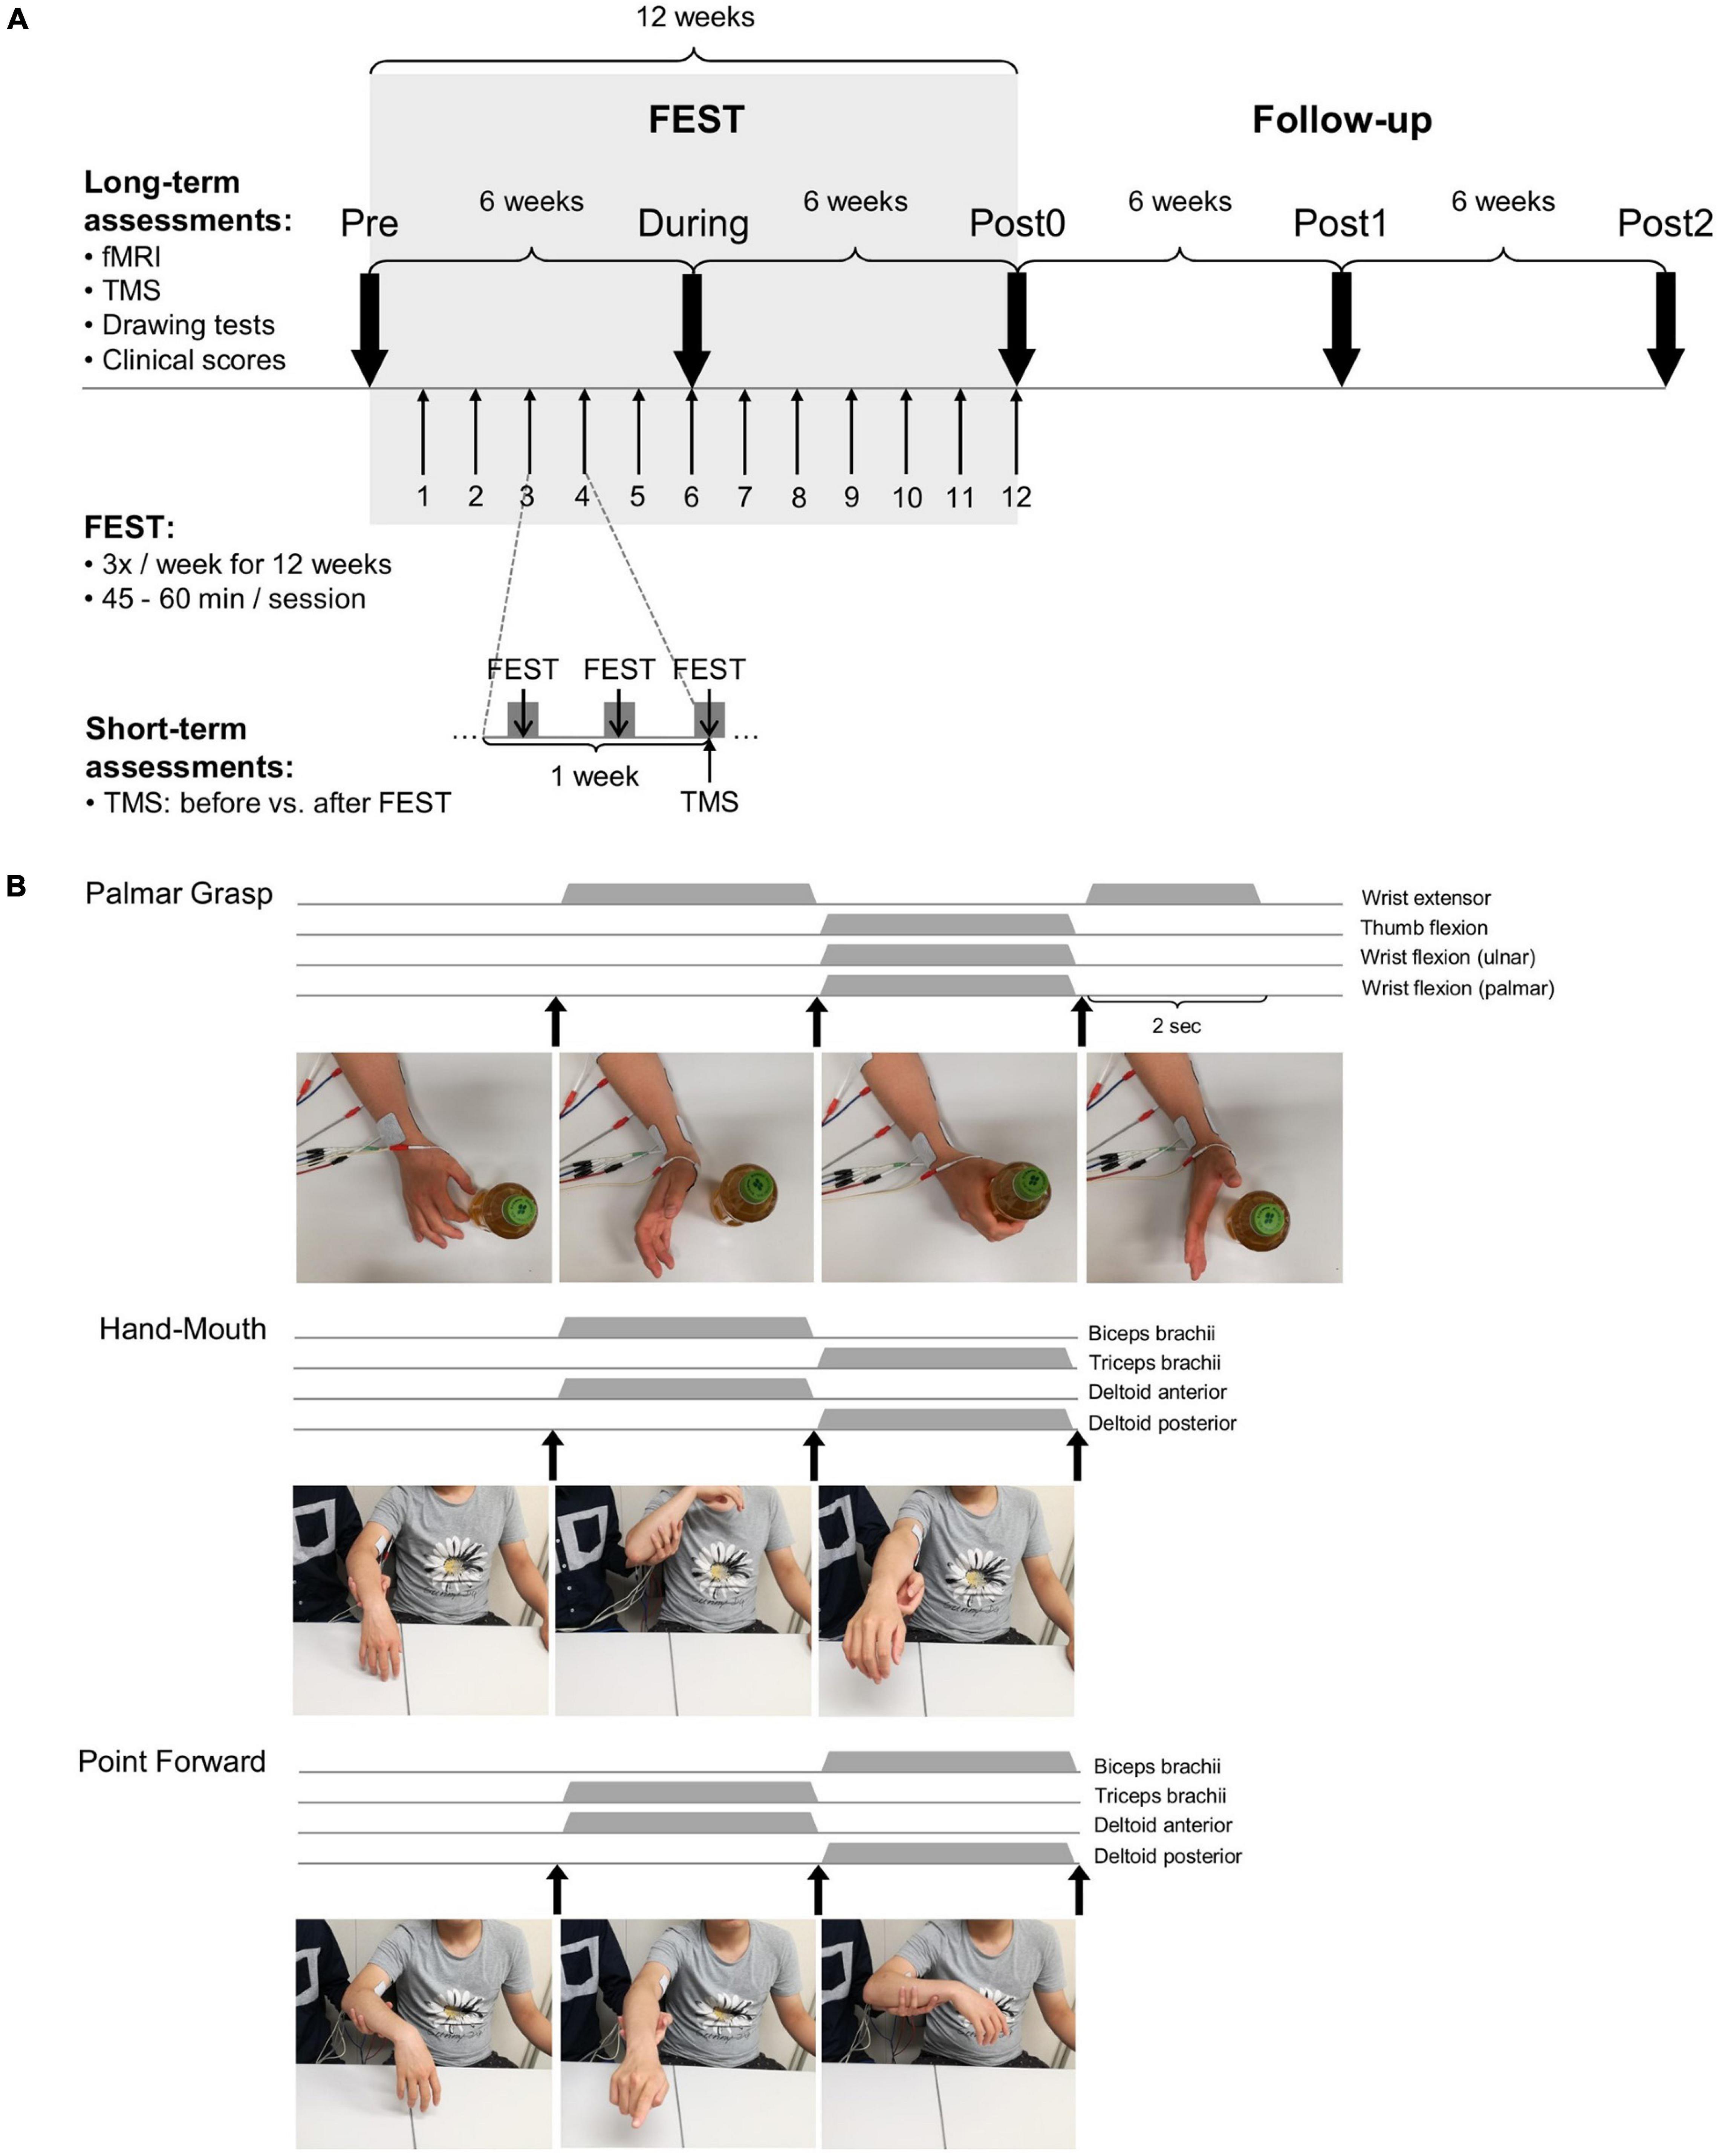 Pathway-specific modulatory effects of neuromuscular electrical stimulation  during pedaling in chronic stroke survivors, Journal of NeuroEngineering  and Rehabilitation